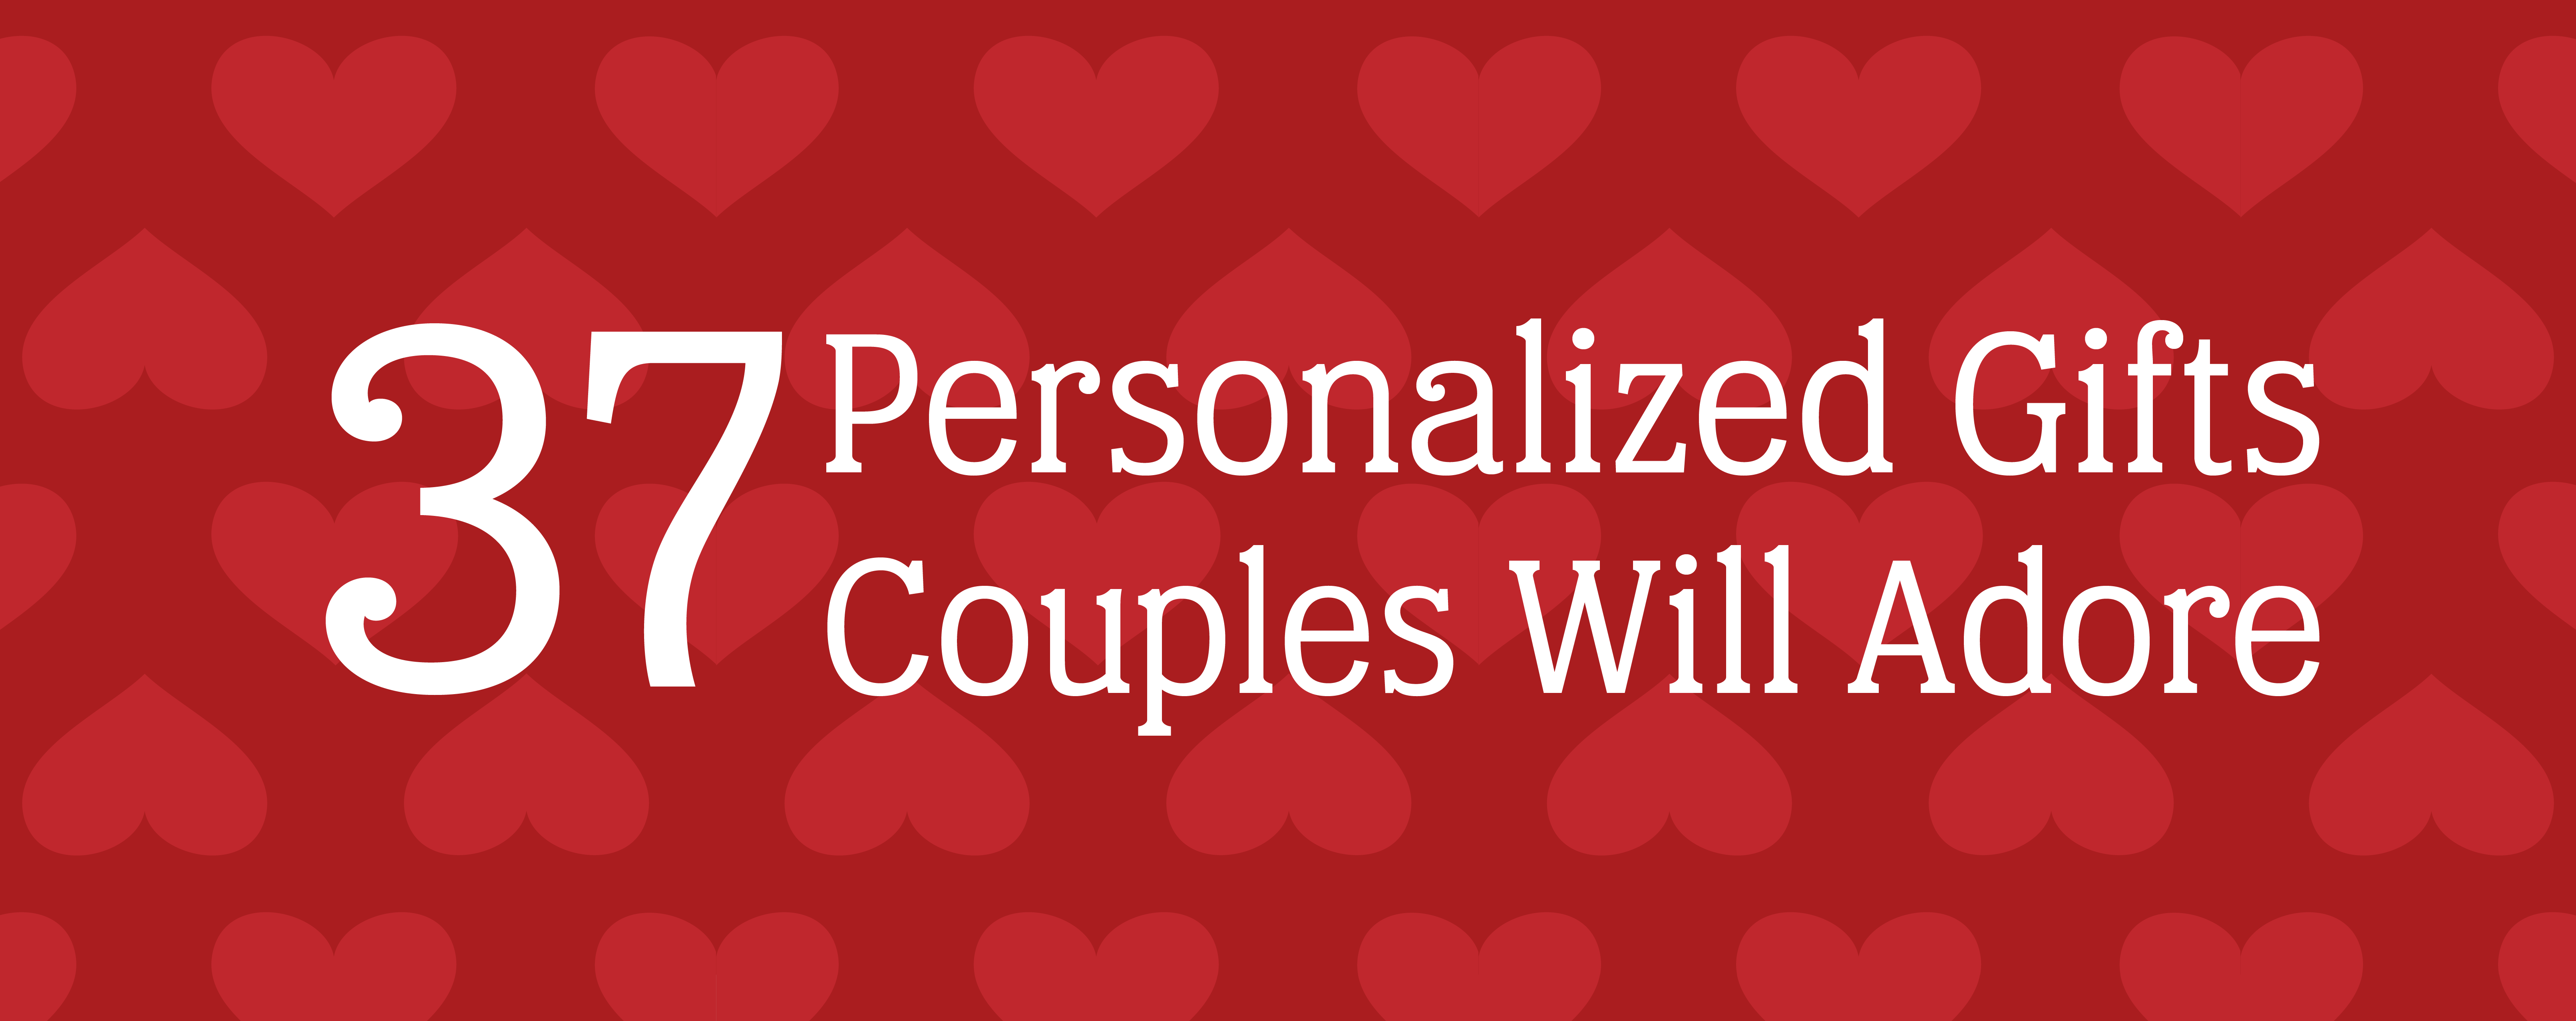 Red heart pattern background with a white text overlay that reads "37 Personalized Gifts Couples Will Adore"